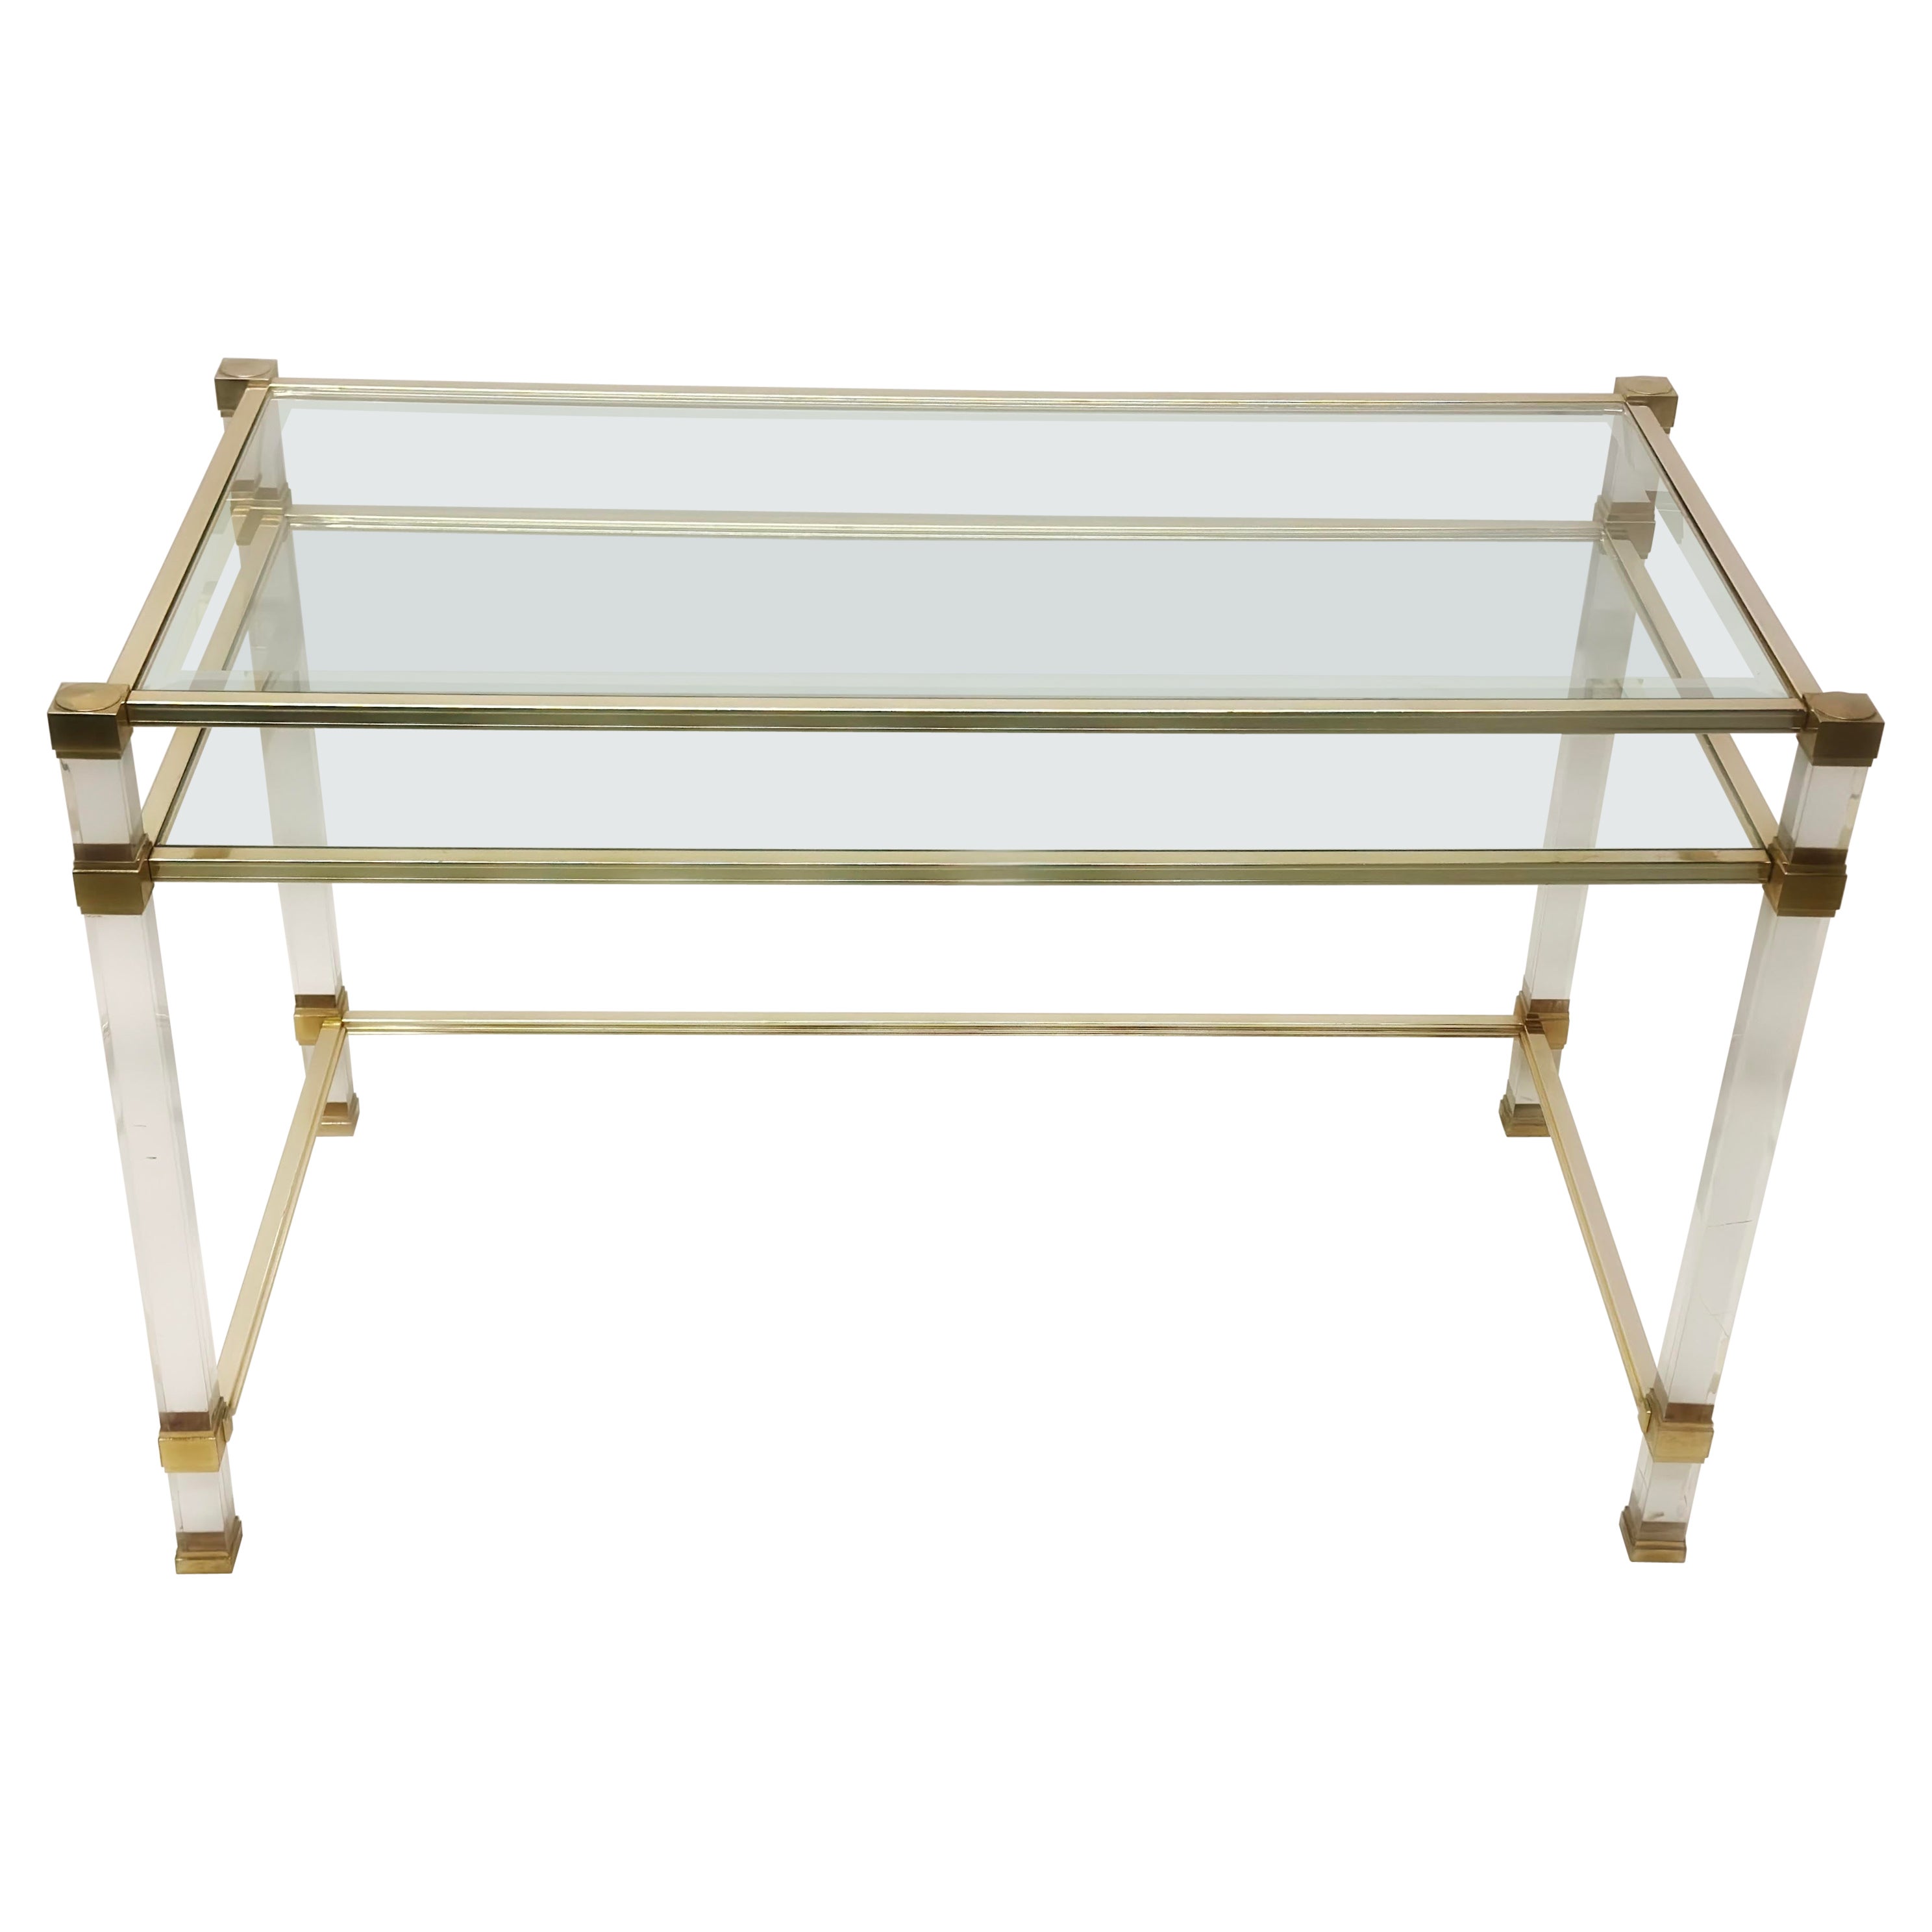 Rare French Mid-Century Modern Lucite & Glass Writing Desk / Vanity by P. Vandel For Sale